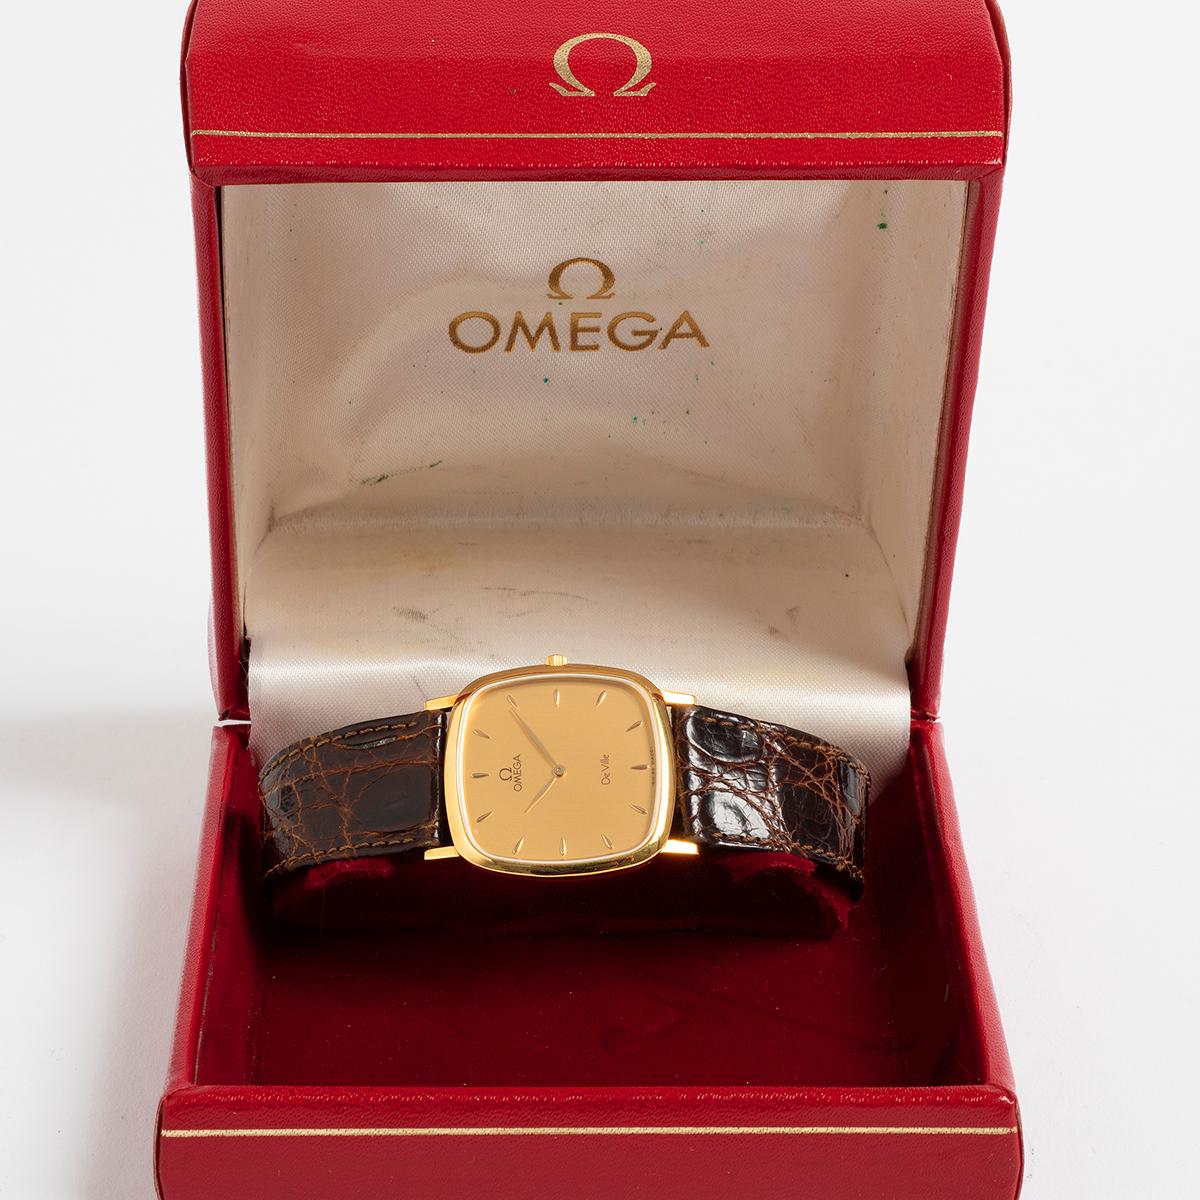 Our vintage Omega De Ville with dual reference 1953378 / 3953378 features an 18k yellow gold case of 30mm (31.5mm inc crown) x 35.8mm lug to lug. This is an ultra thin (4.5mm) quartz De Ville which is presented in outmoding and original condition,